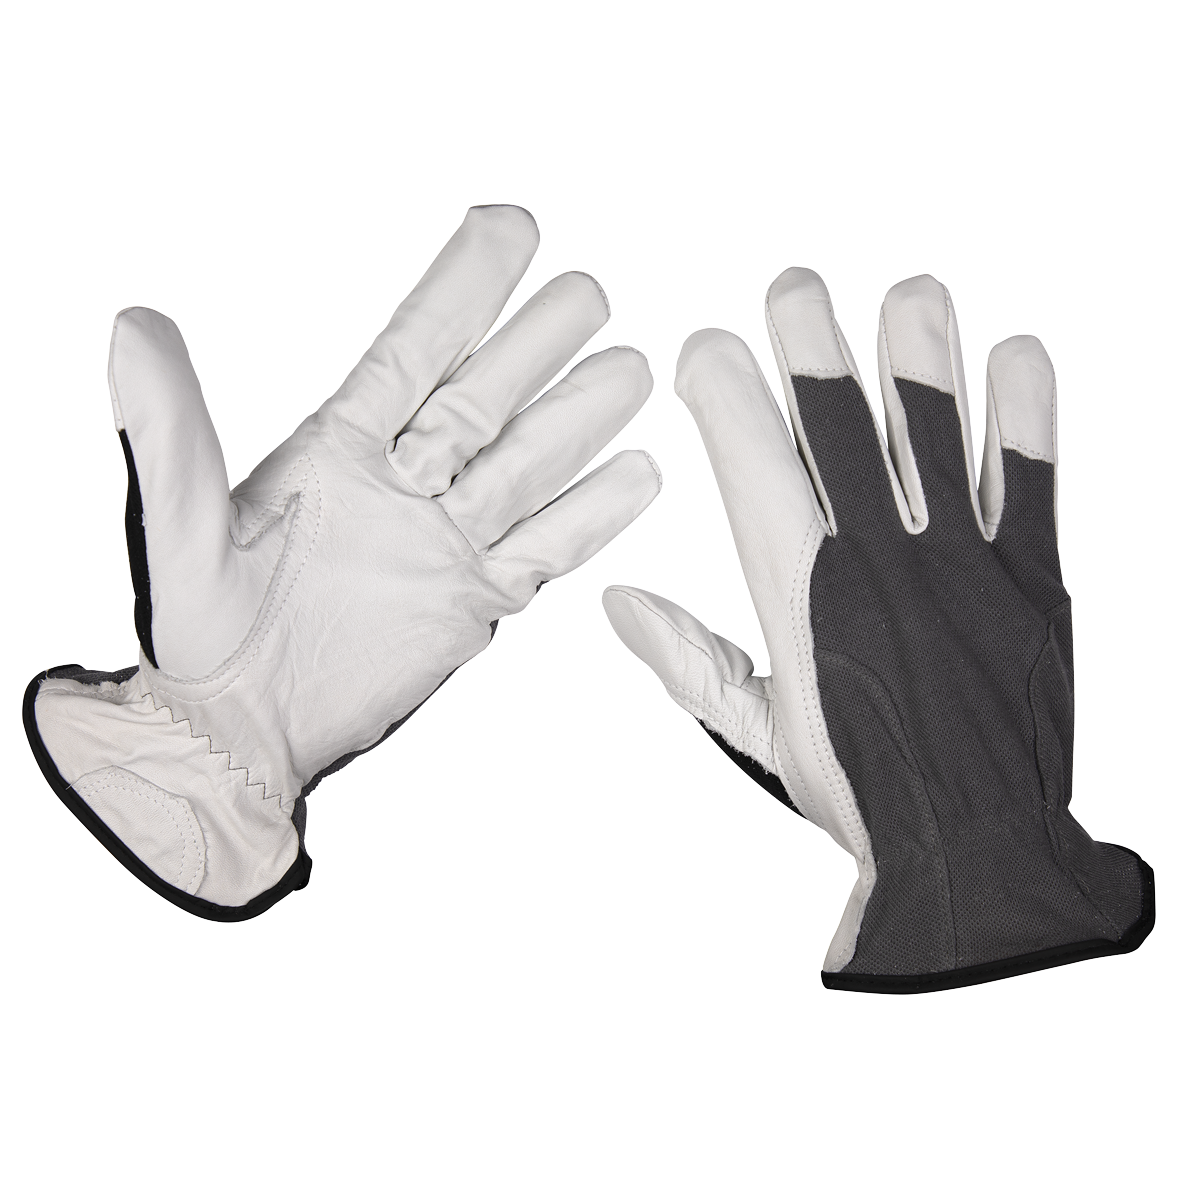 Sealey Super Cool Hide Gloves X-Large - Pair 9136XL